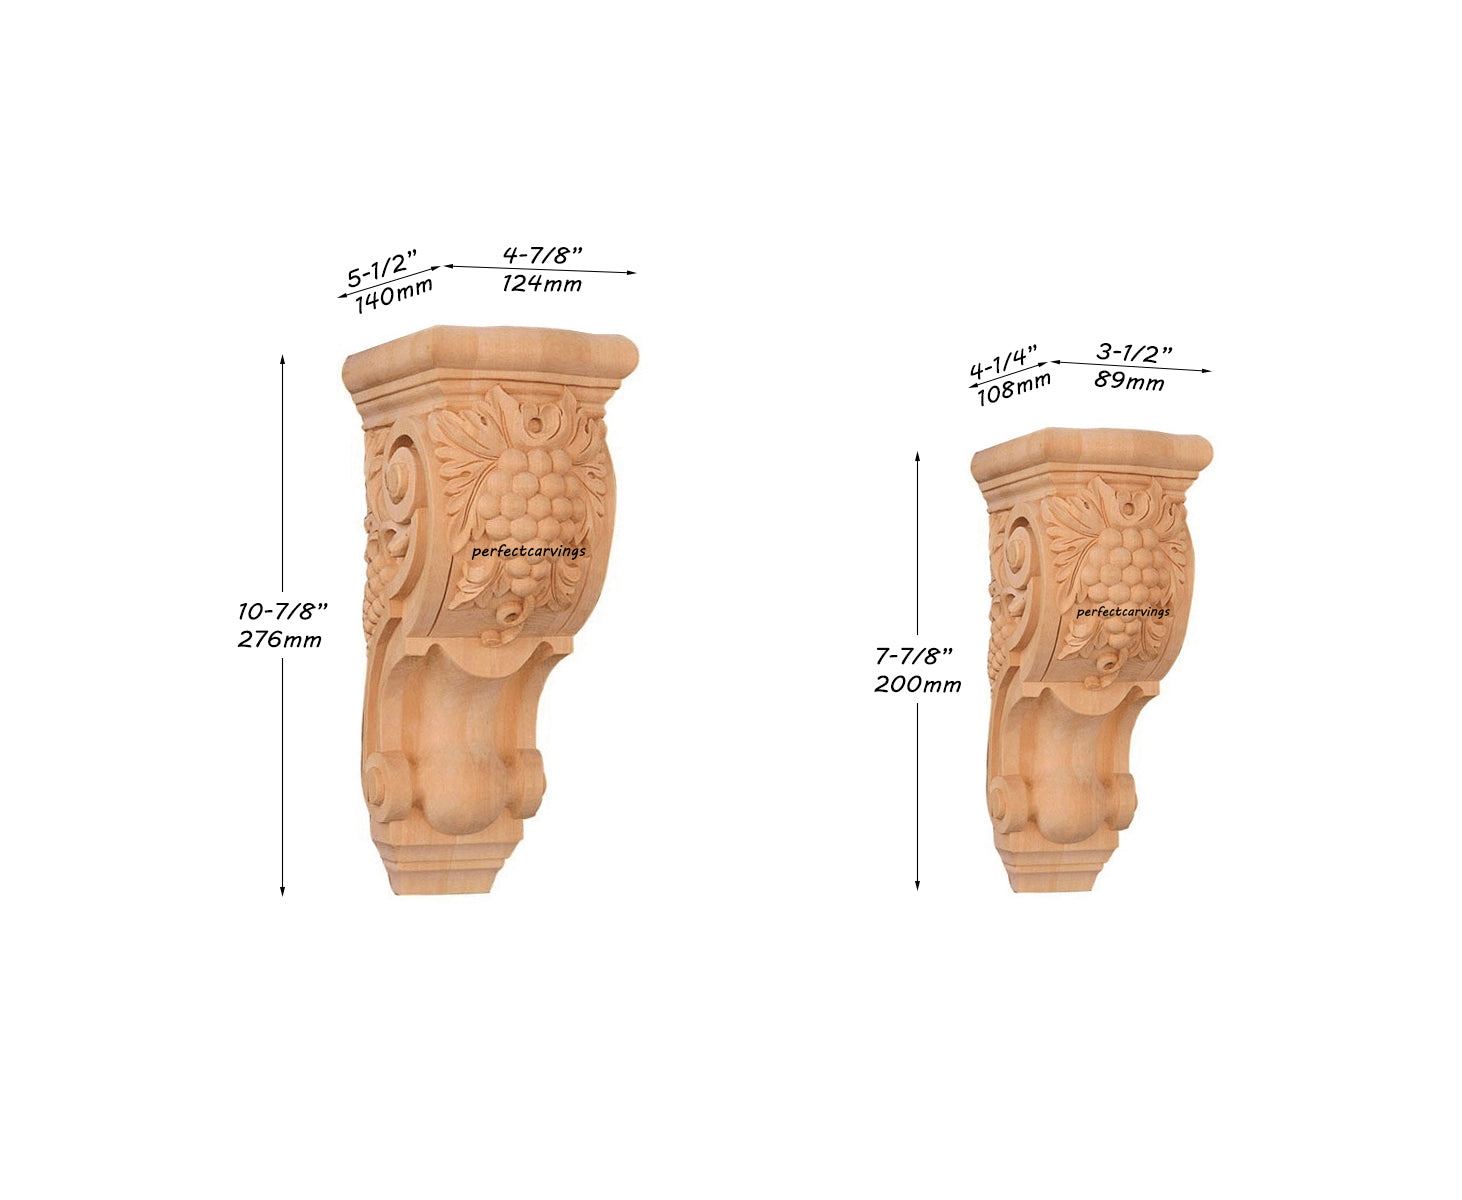 PAIR of Elegant Grape Carved Wood Corbels, Available in  7-7/8